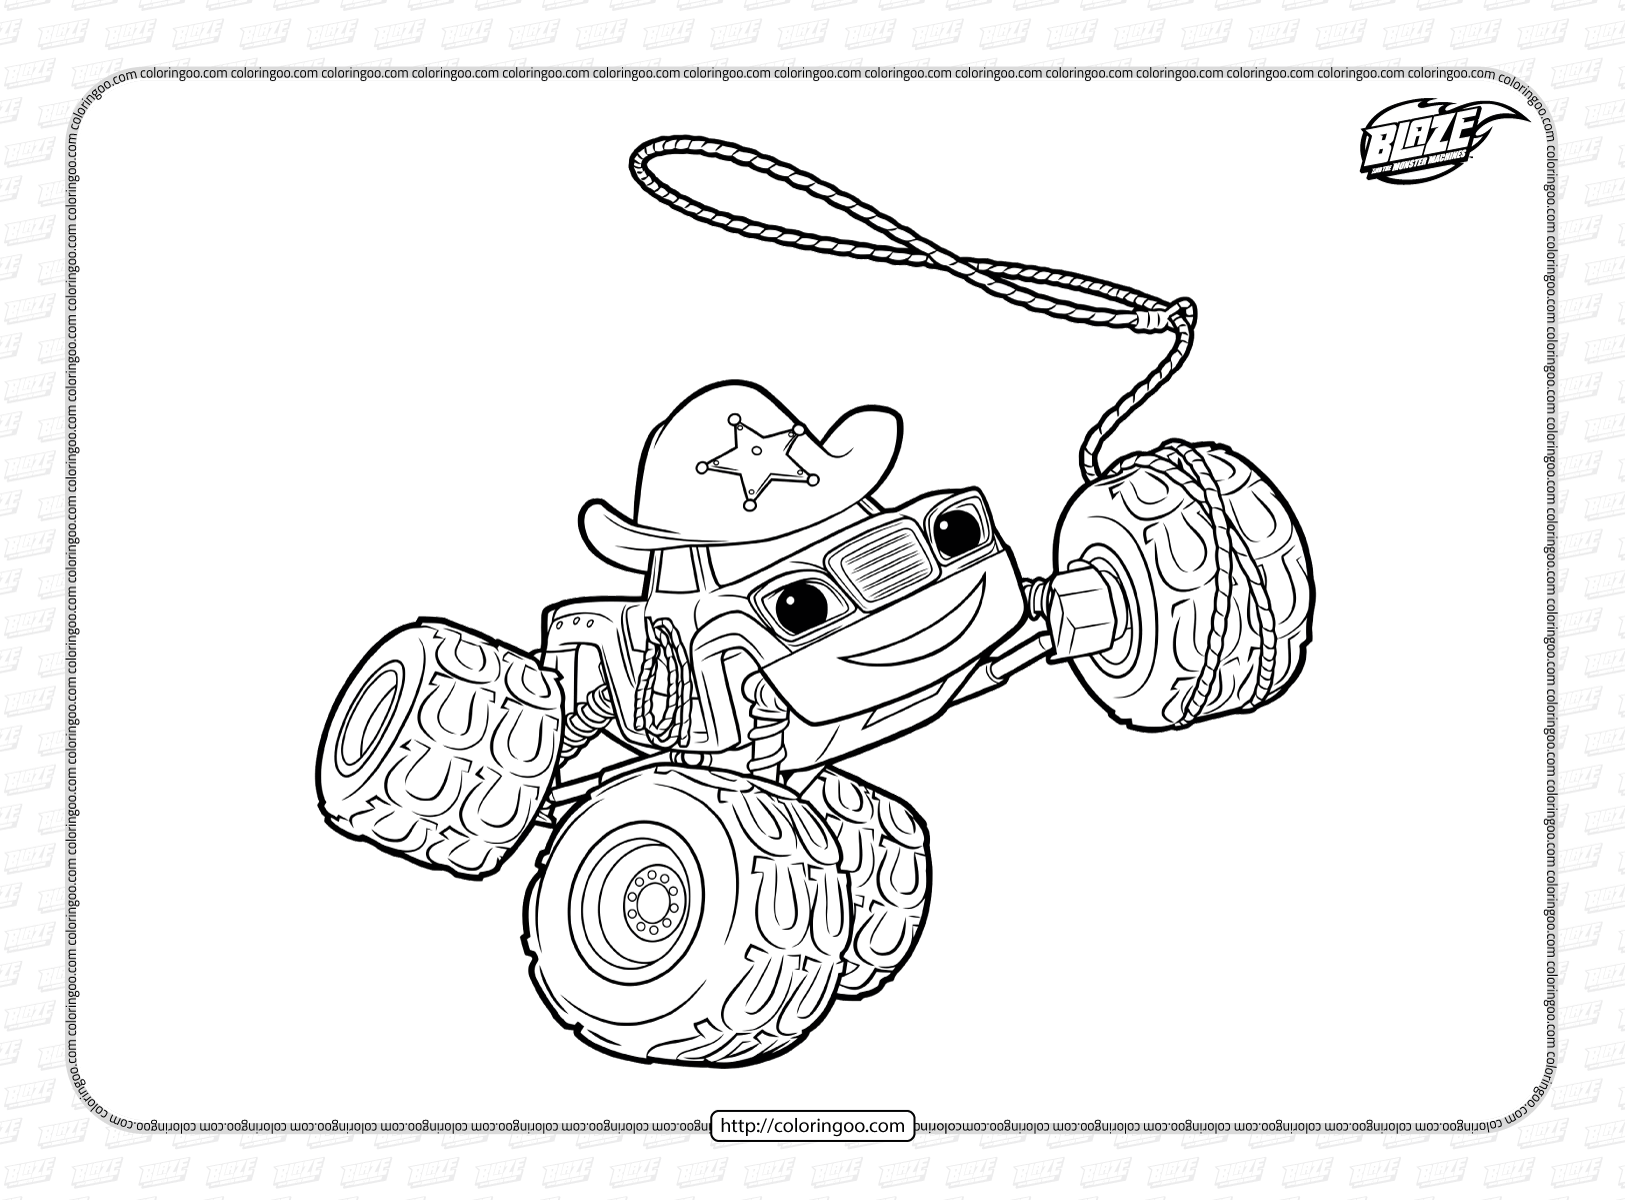 blaze and the monster machines starla coloring page